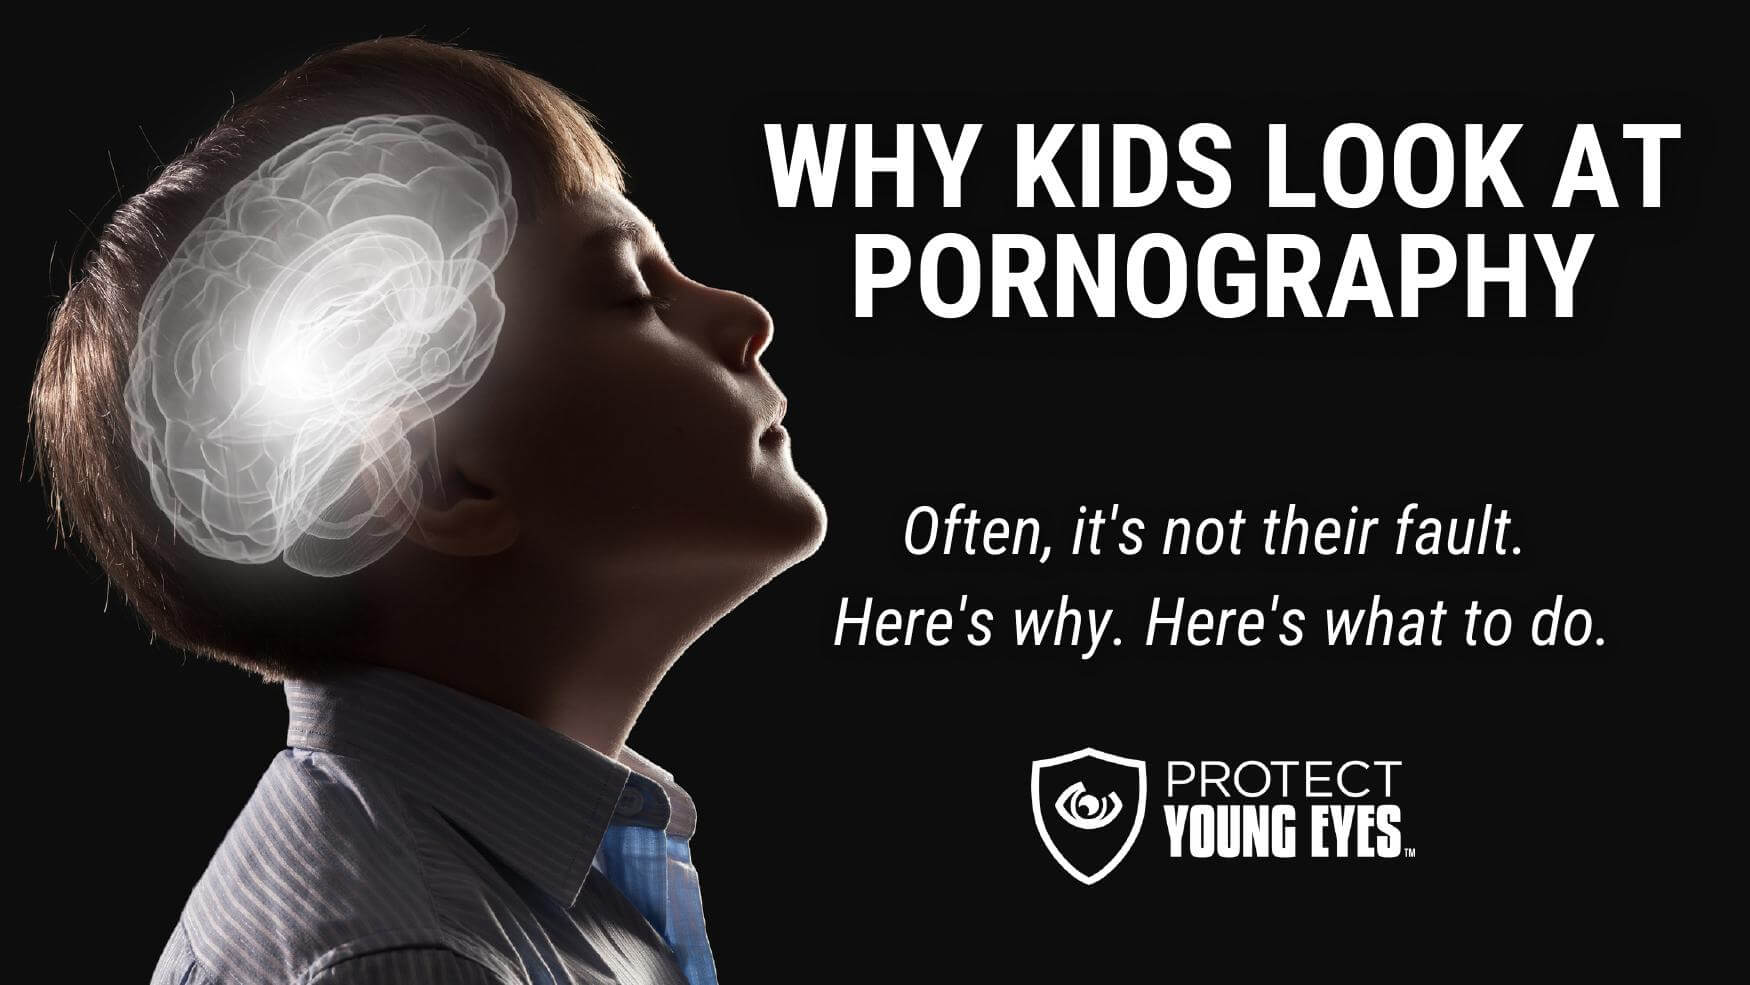 Barbi Sex Porno - Why Kids Look at Pornography (It's not their fault) - Protect Young Eyes